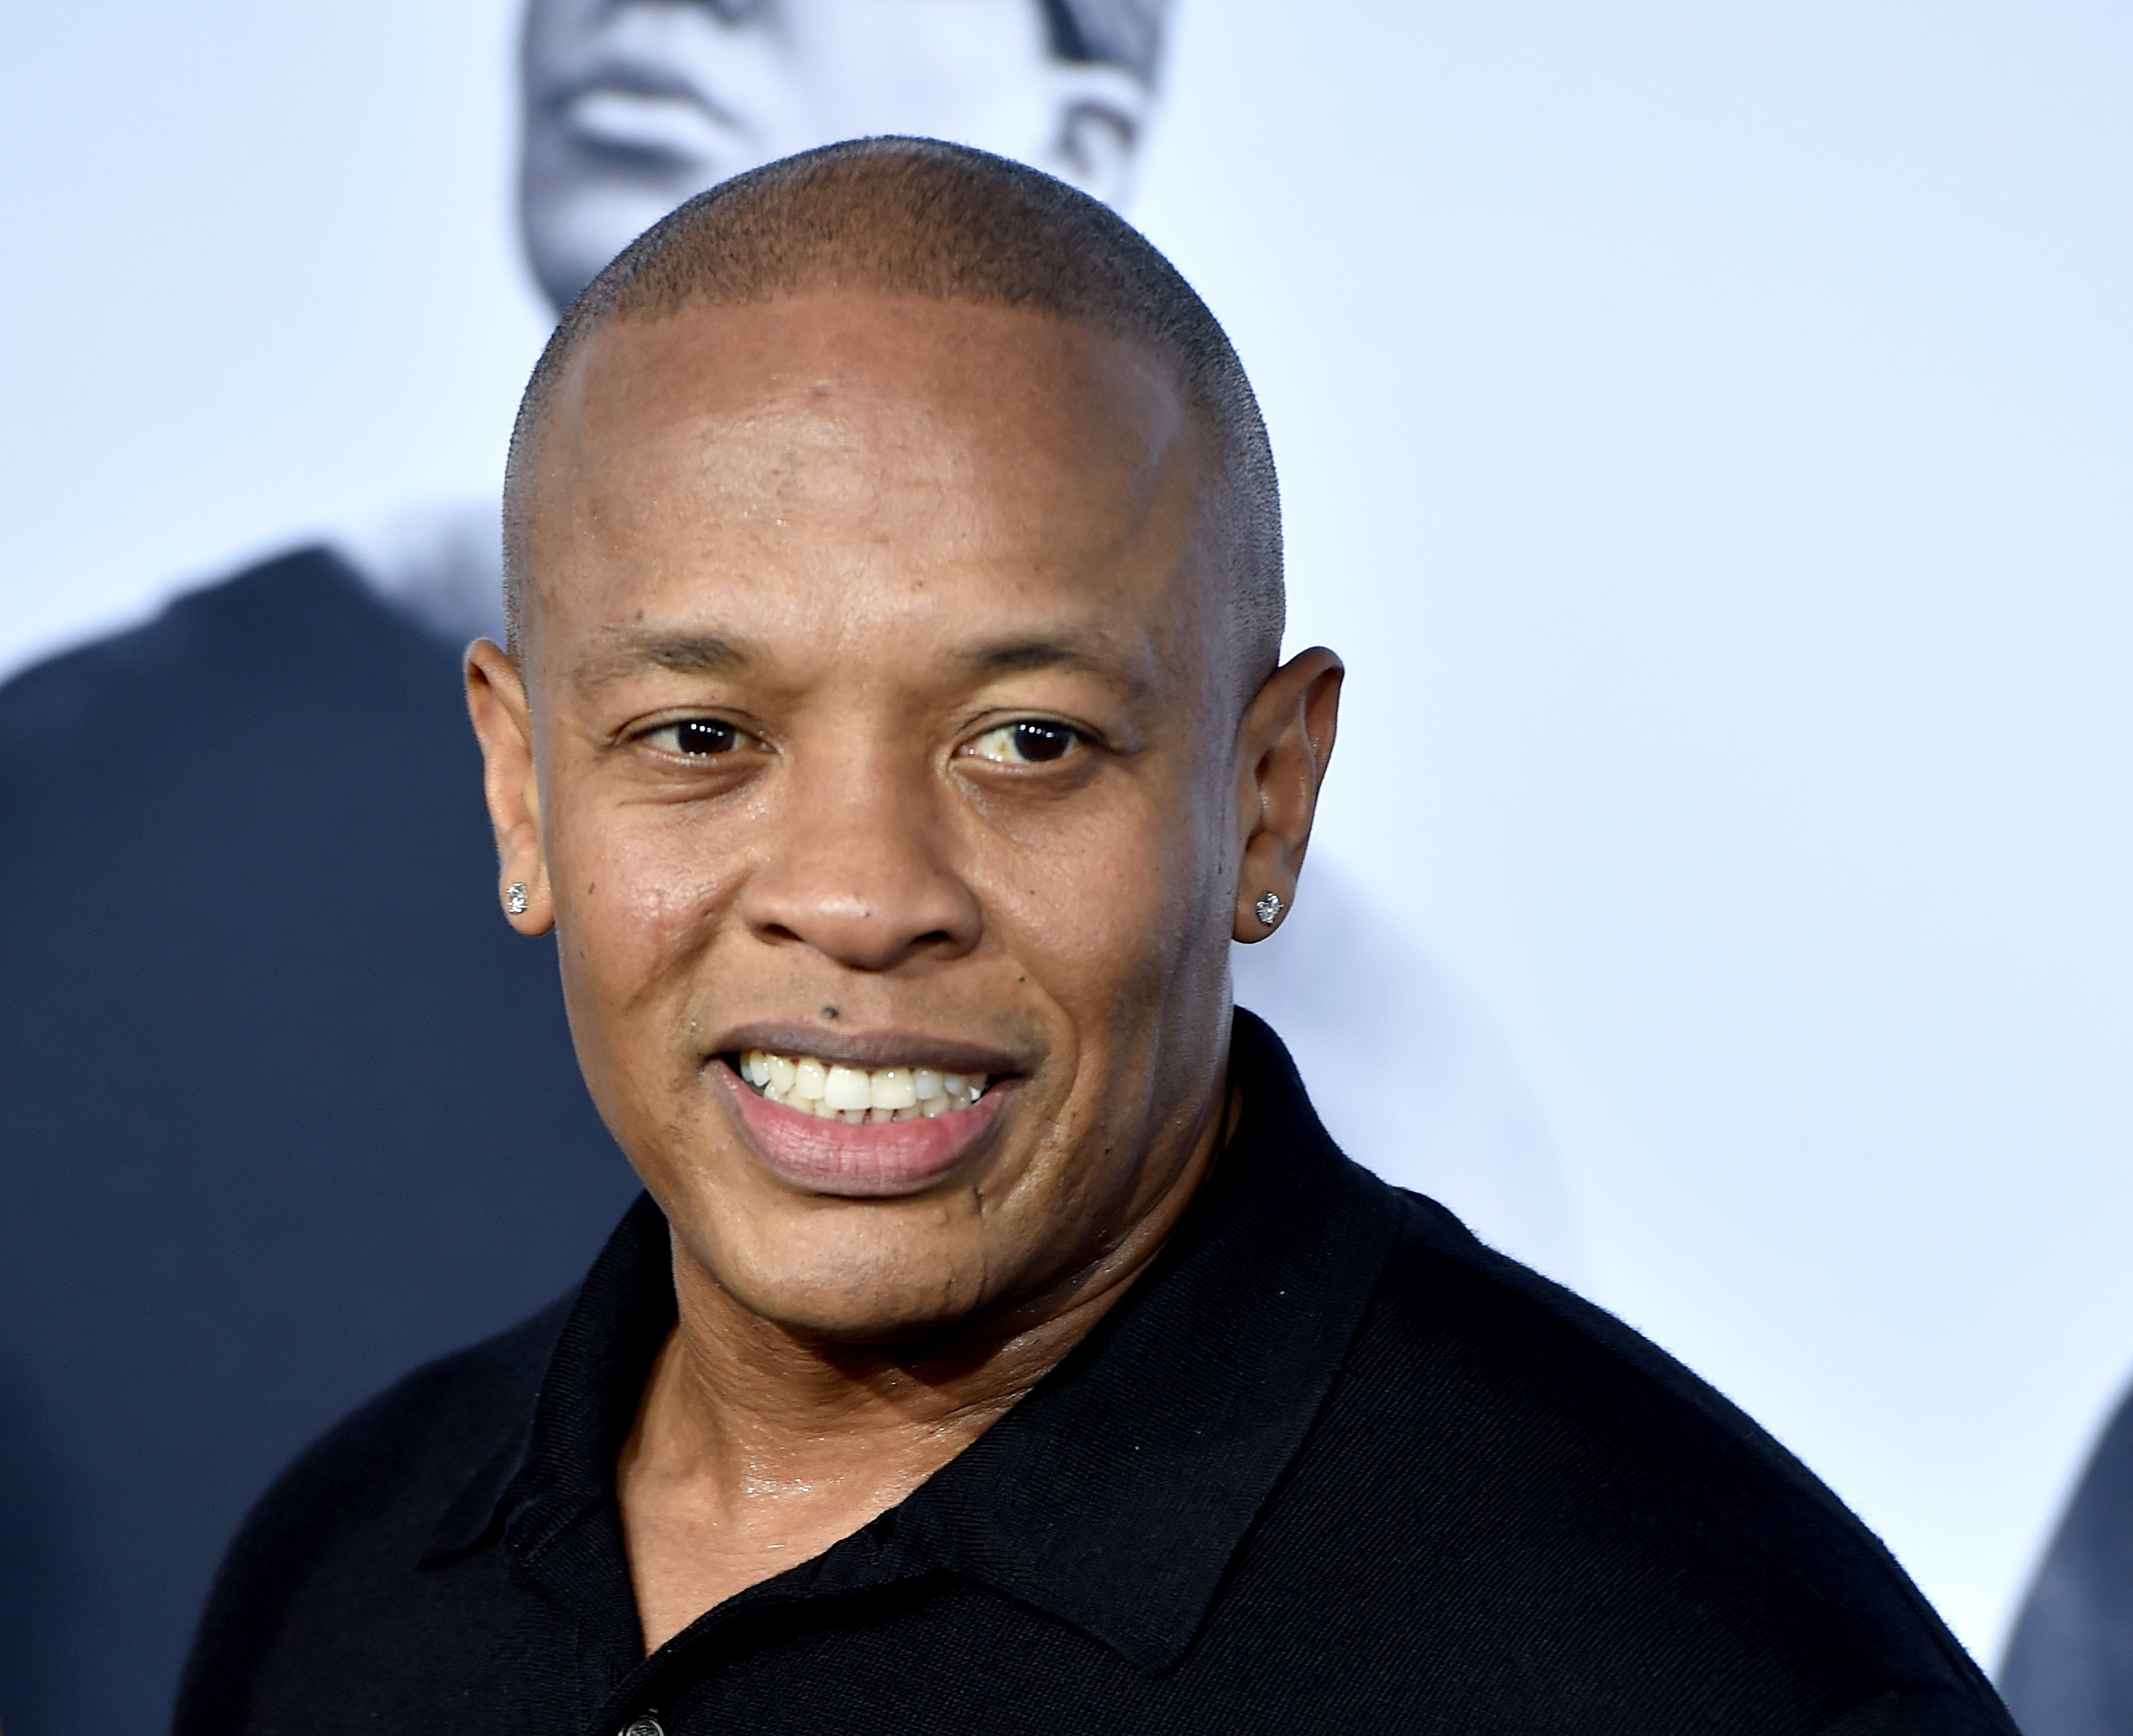 Rapper Dr. Dre arrives at the premiere of Universal Pictures and Legendary Pictures' "Straight Outta Compton" at the Microsoft Theatre in Los Angeles on Aug. 10, 2015